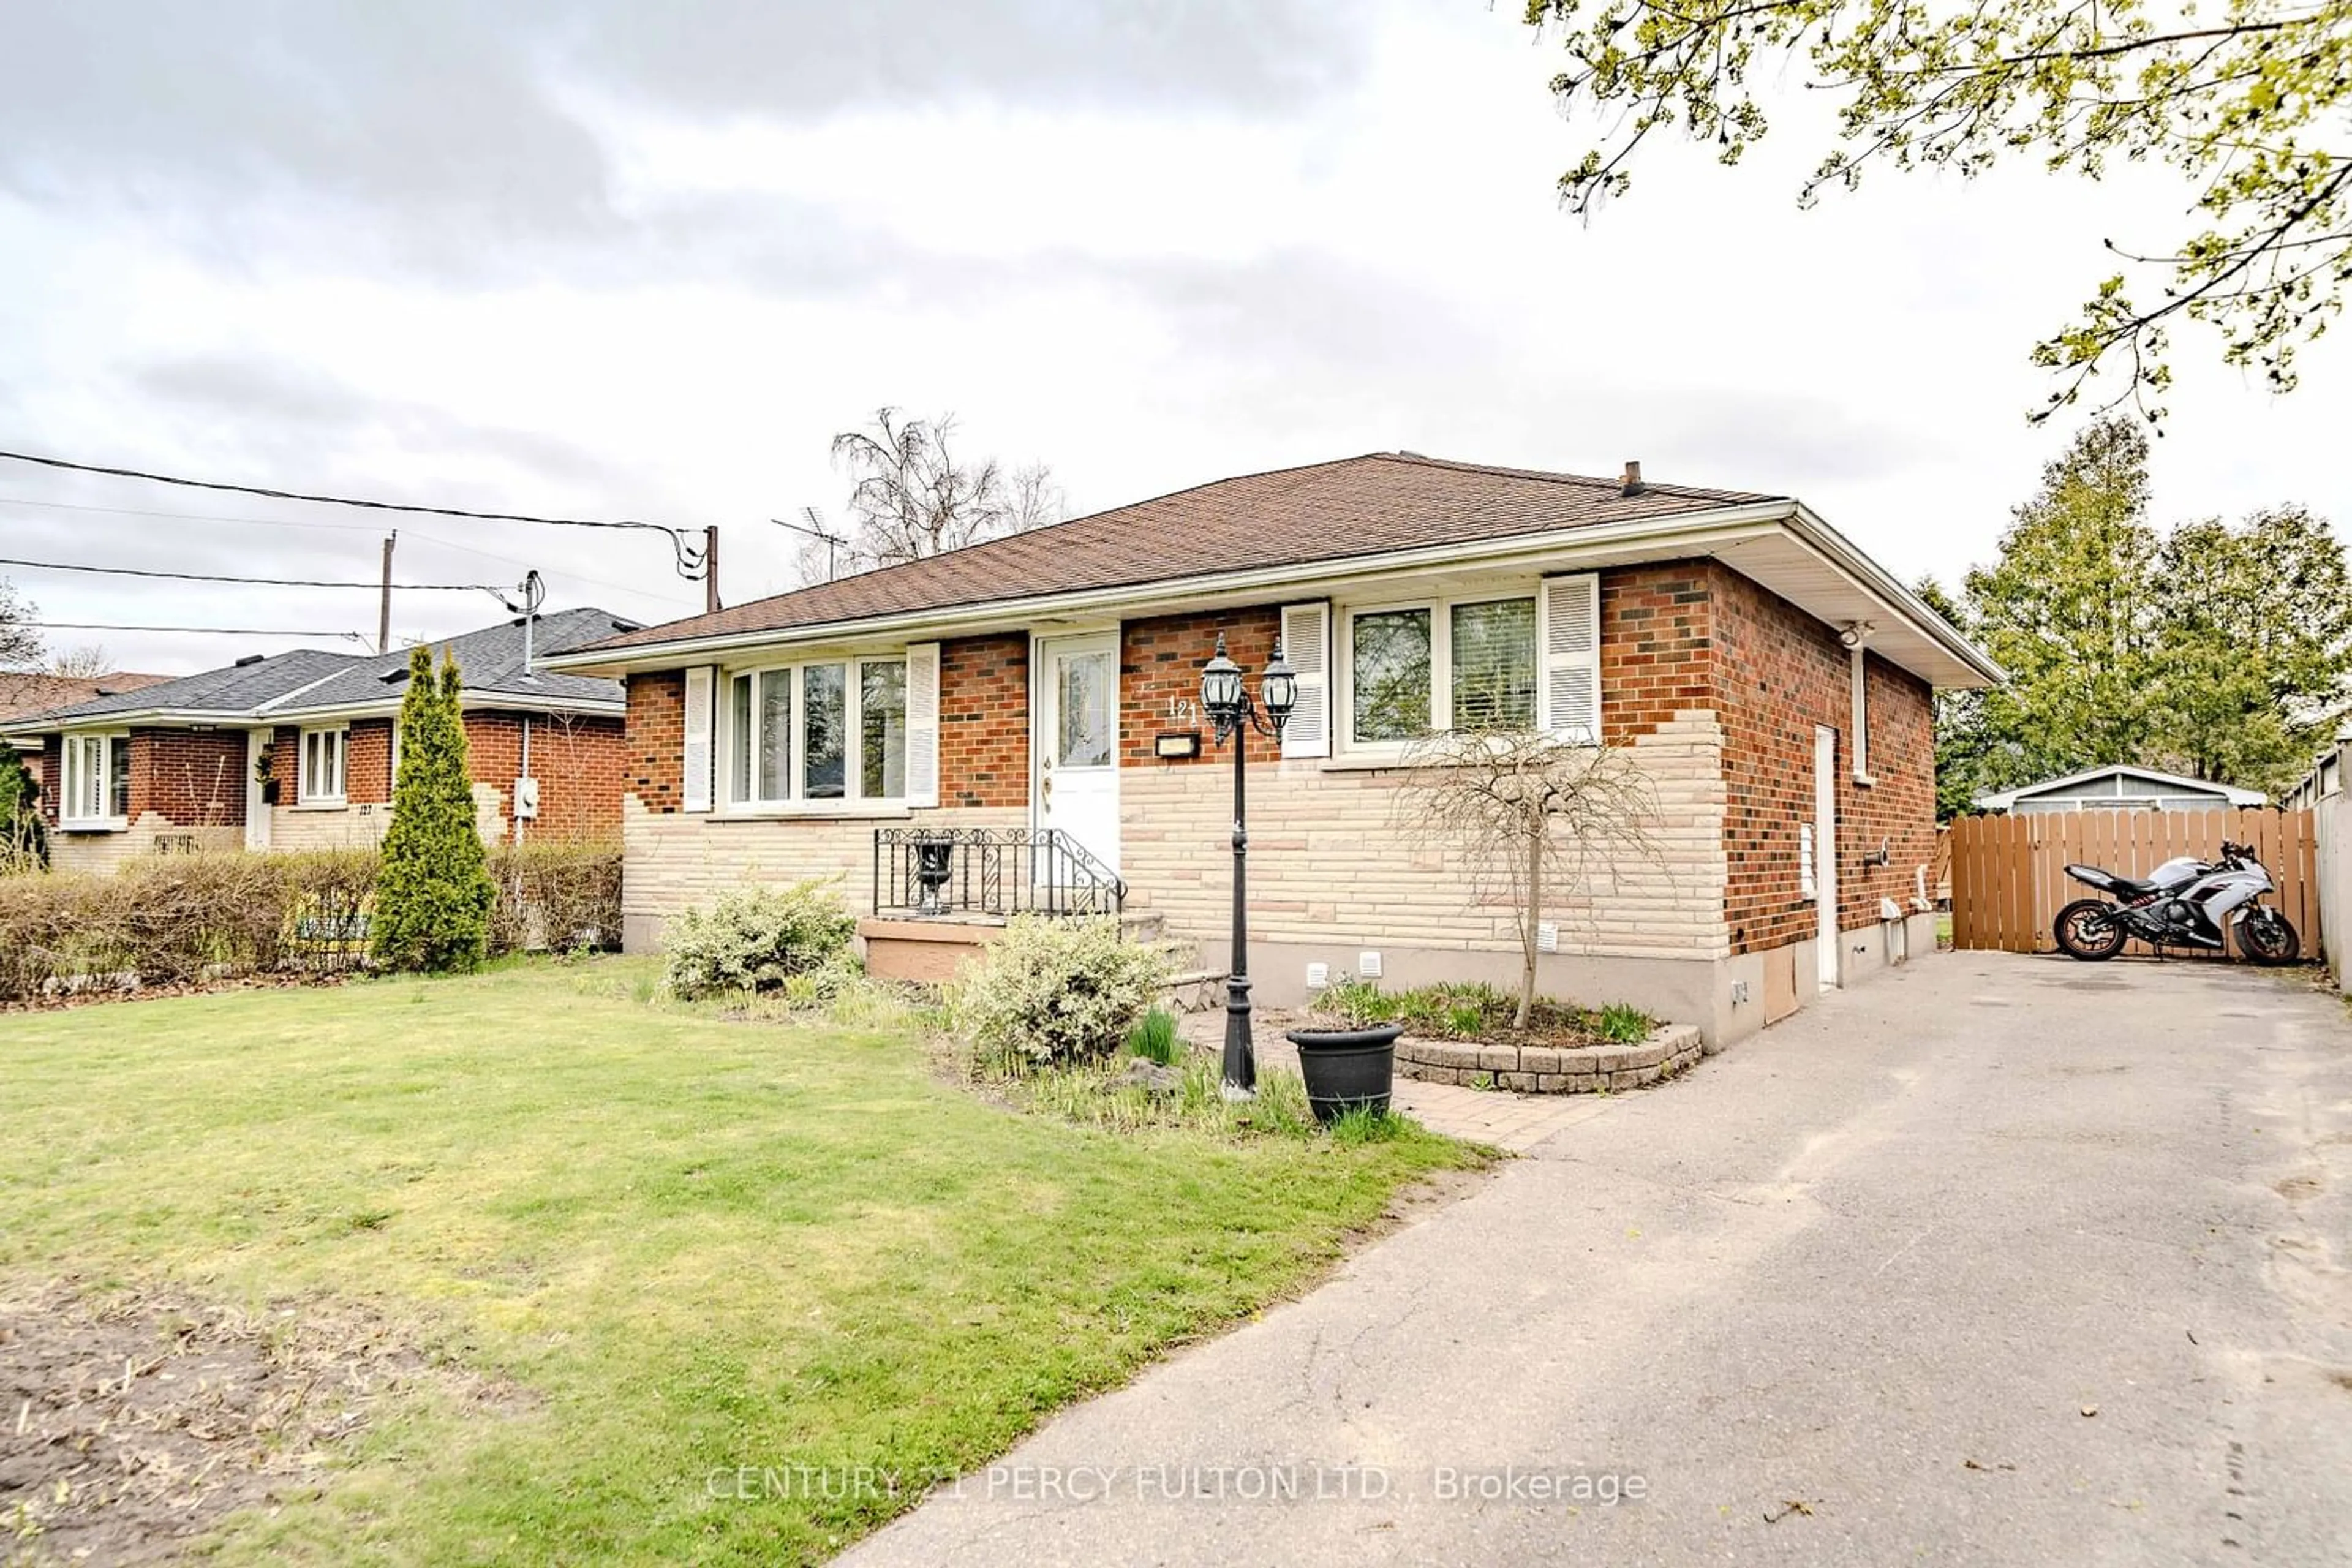 Home with brick exterior material for 121 Riverside Dr, Oshawa Ontario L1G 6J6